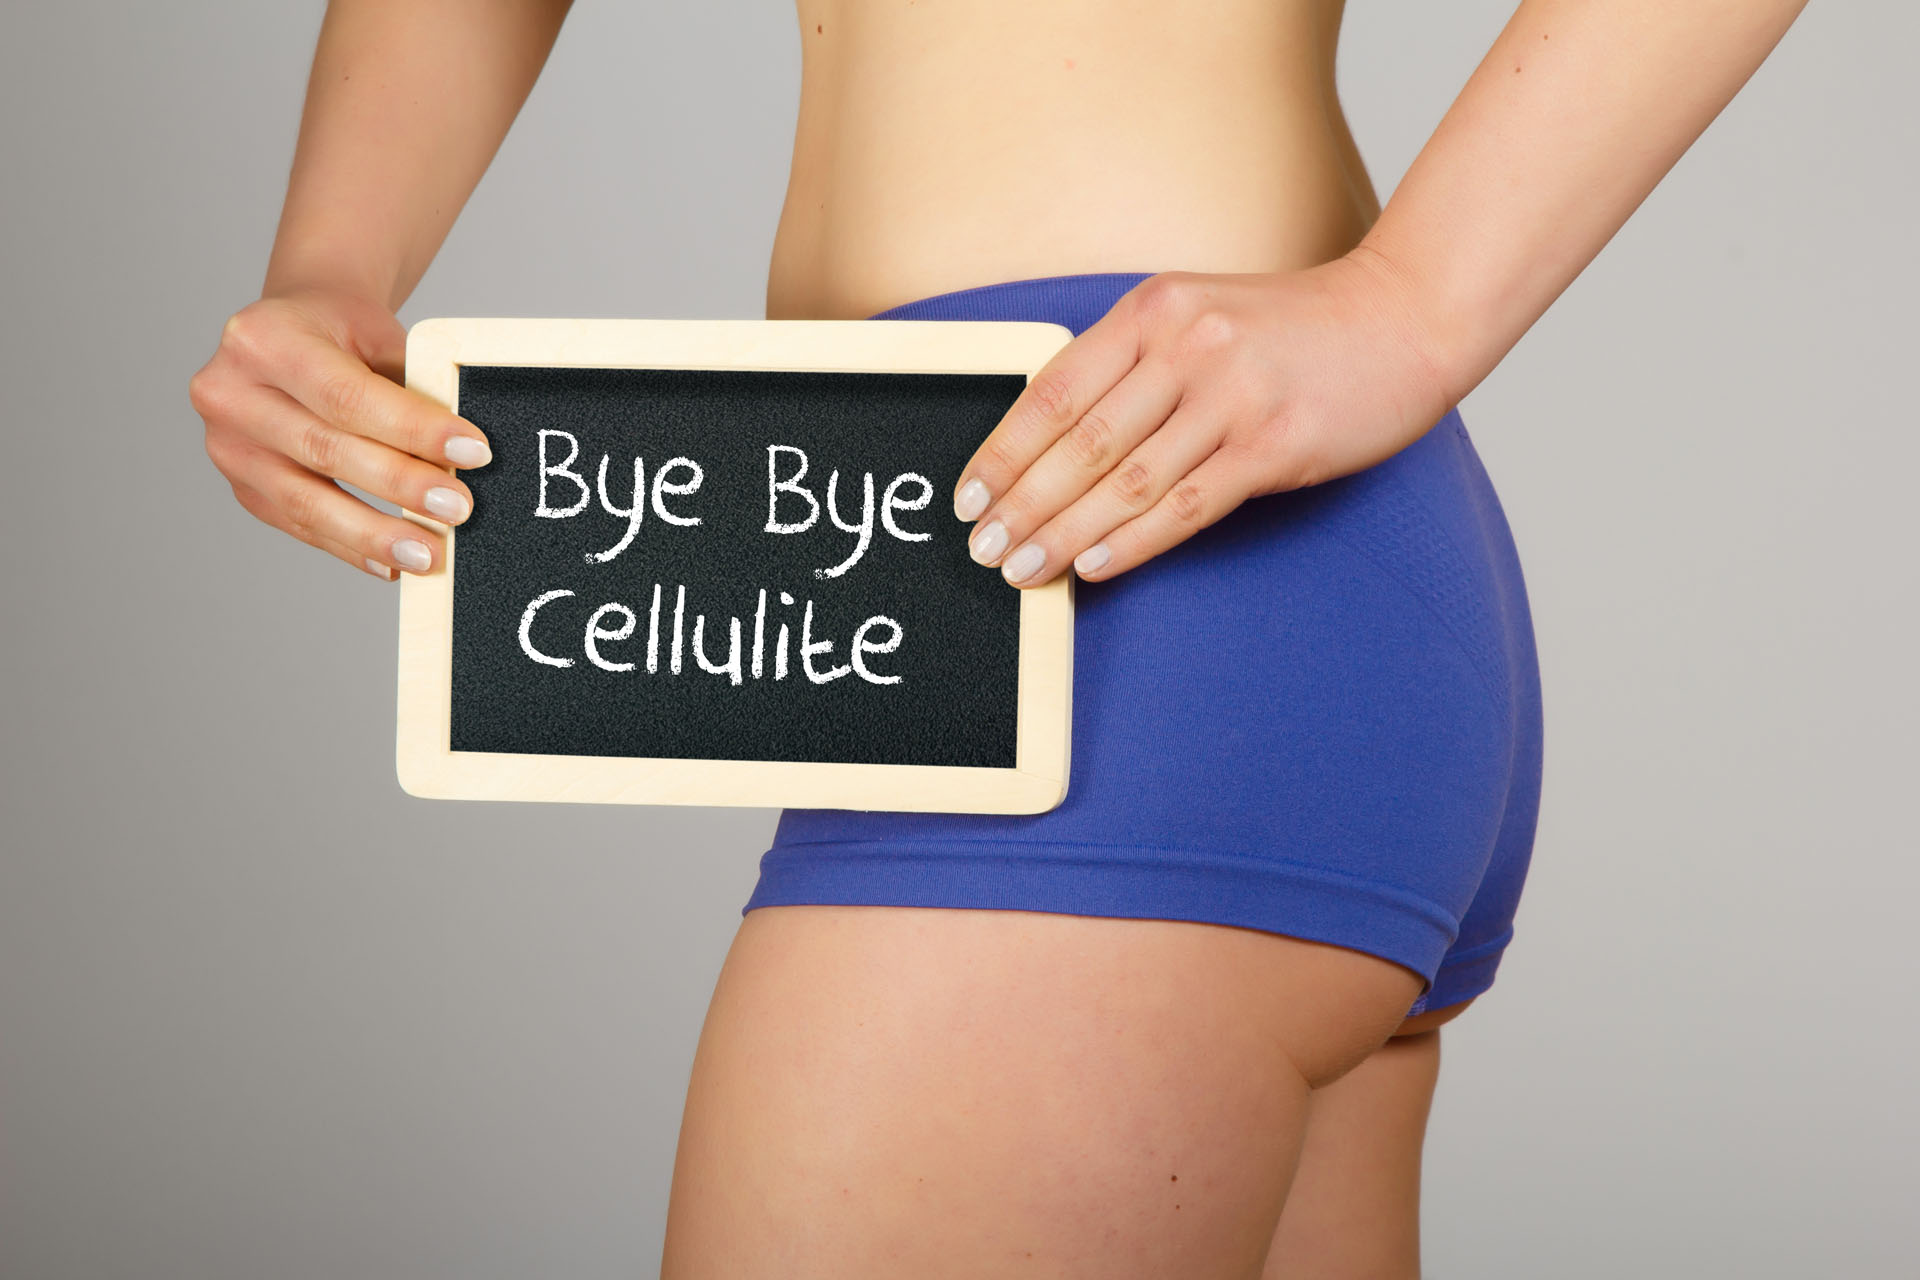 Beautiful young woman in lingerie holding a small chalk board with text "Bye Bye Cellulite" Center focus